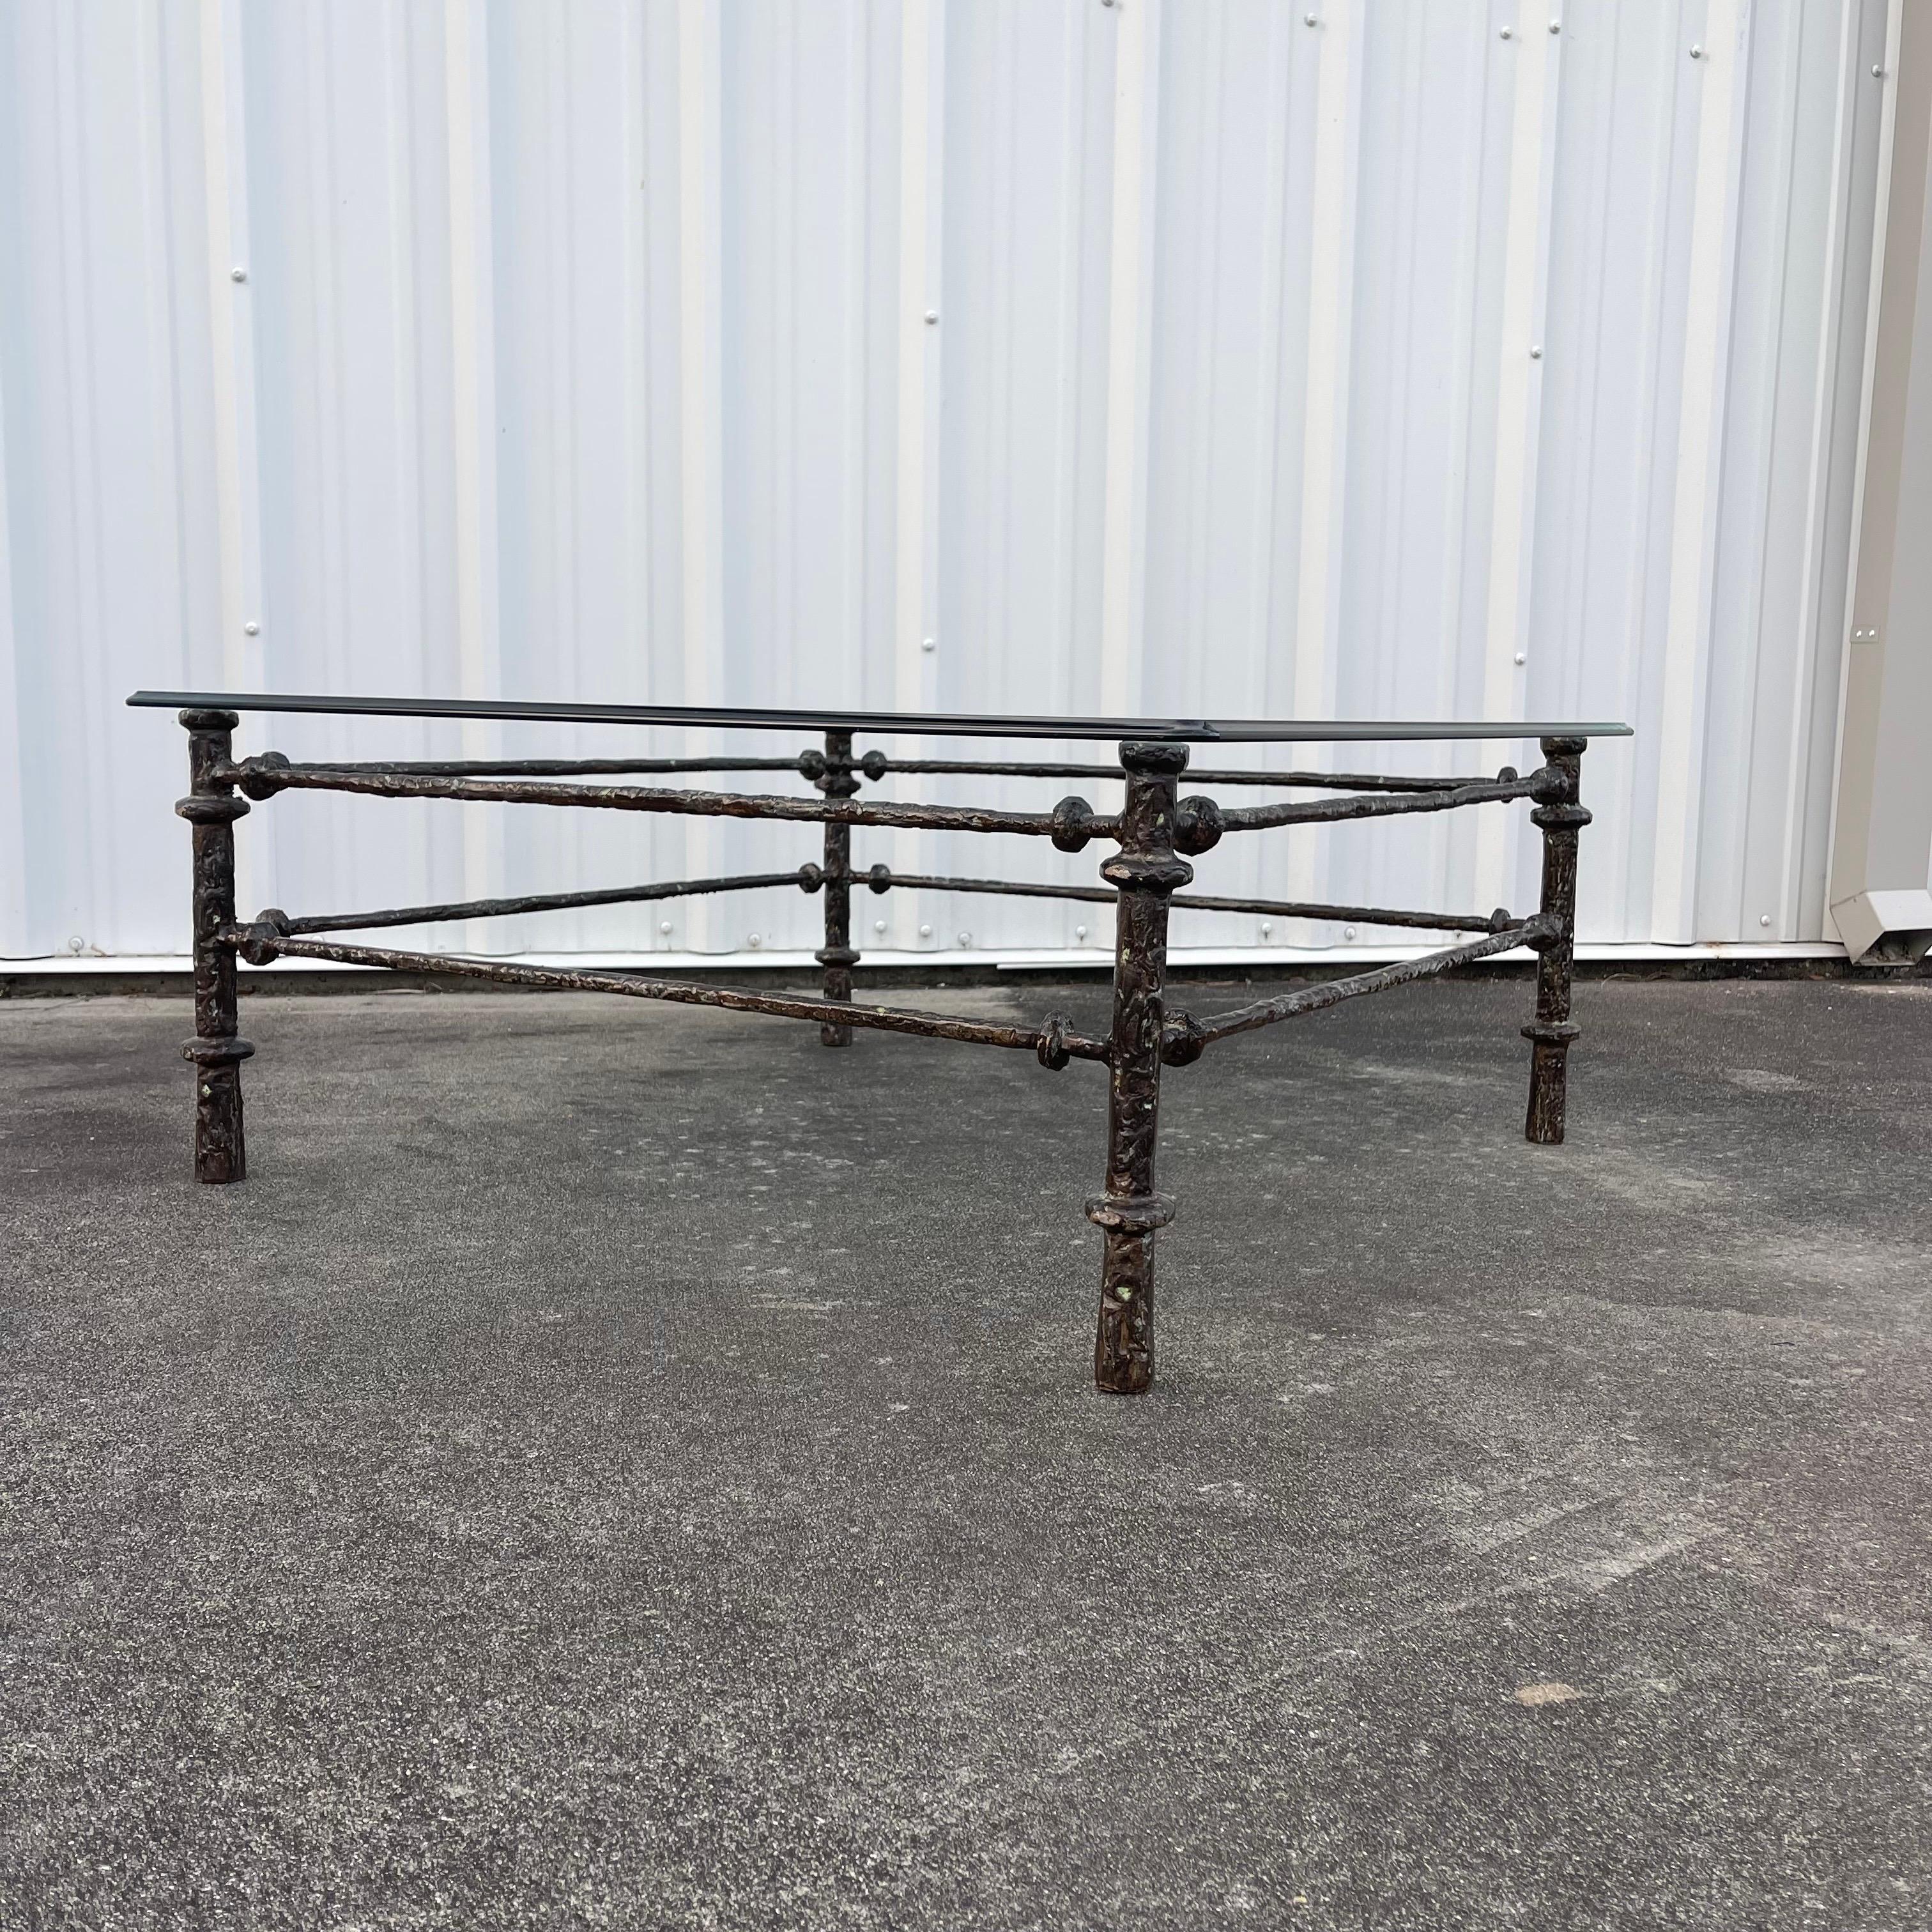 Coffee table in the style of Giacometti, with a patinated bronze finish over a base metal (likely aluminum).

If preferred, table base can be sold without glass and shipped via UPS to the continental United States. Cost will be approximately $299.